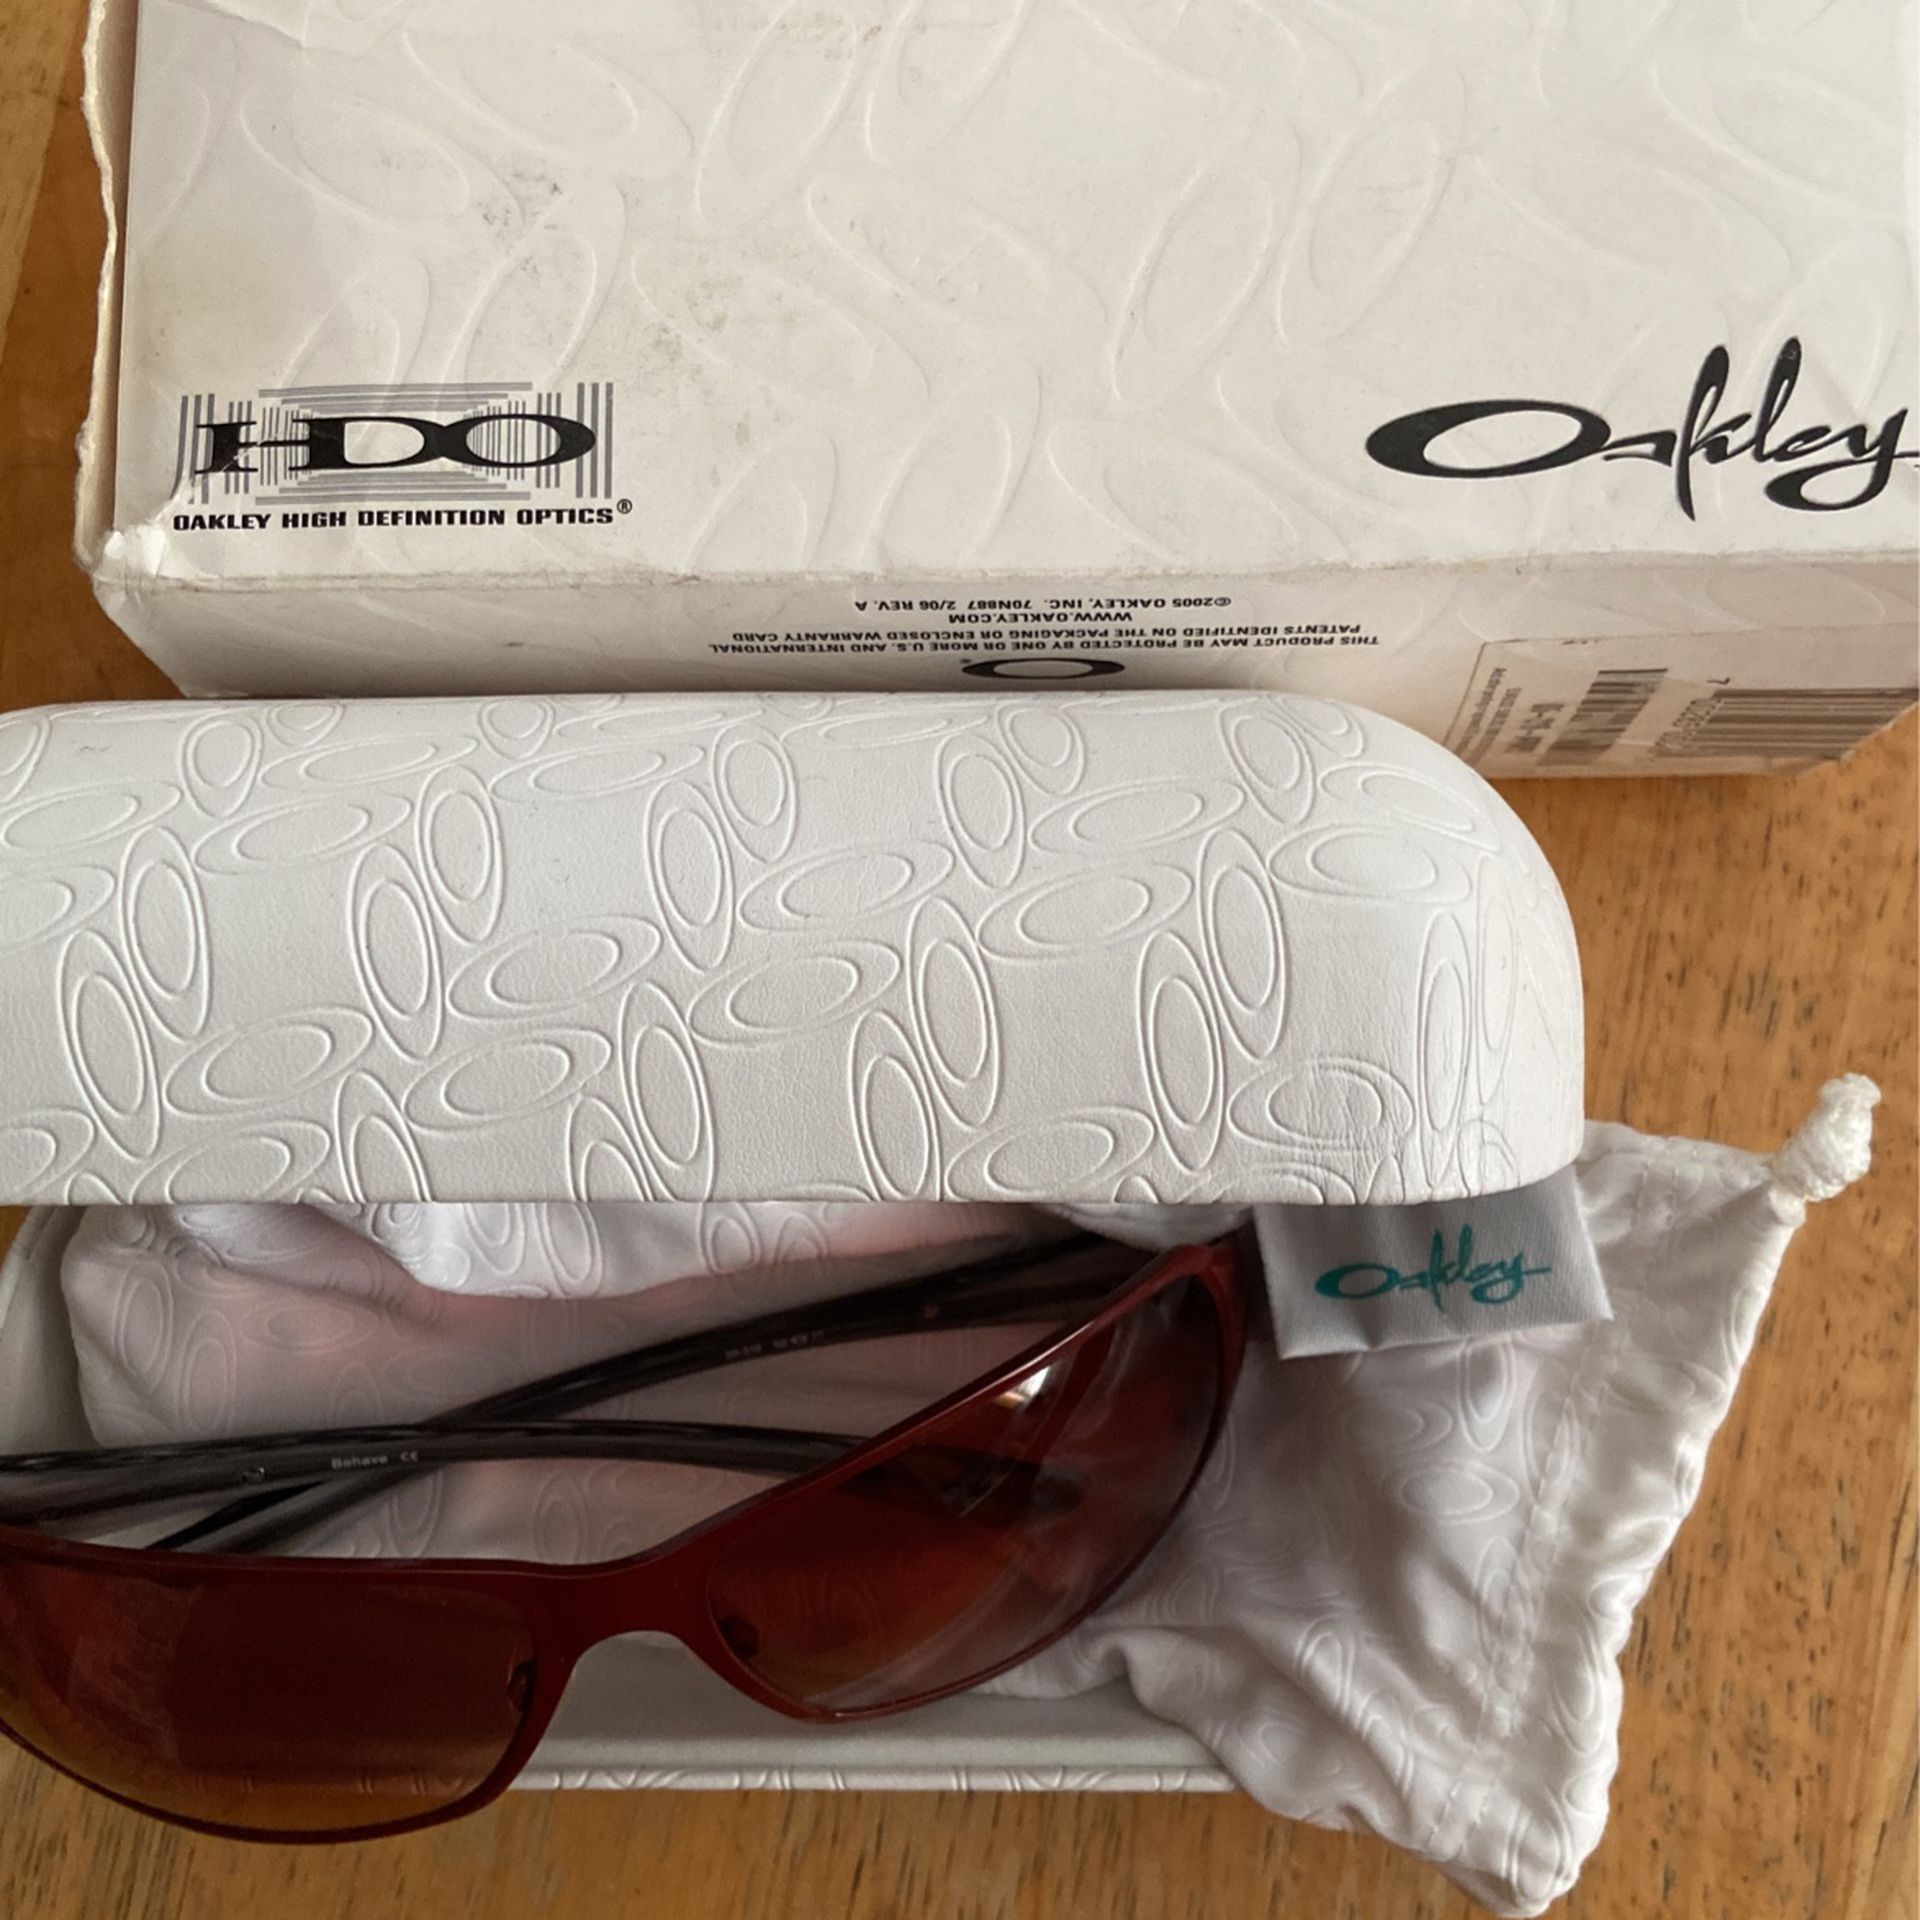 Oliver People's M-4 30Th Sunglasses for Sale in Los Angeles, CA - OfferUp